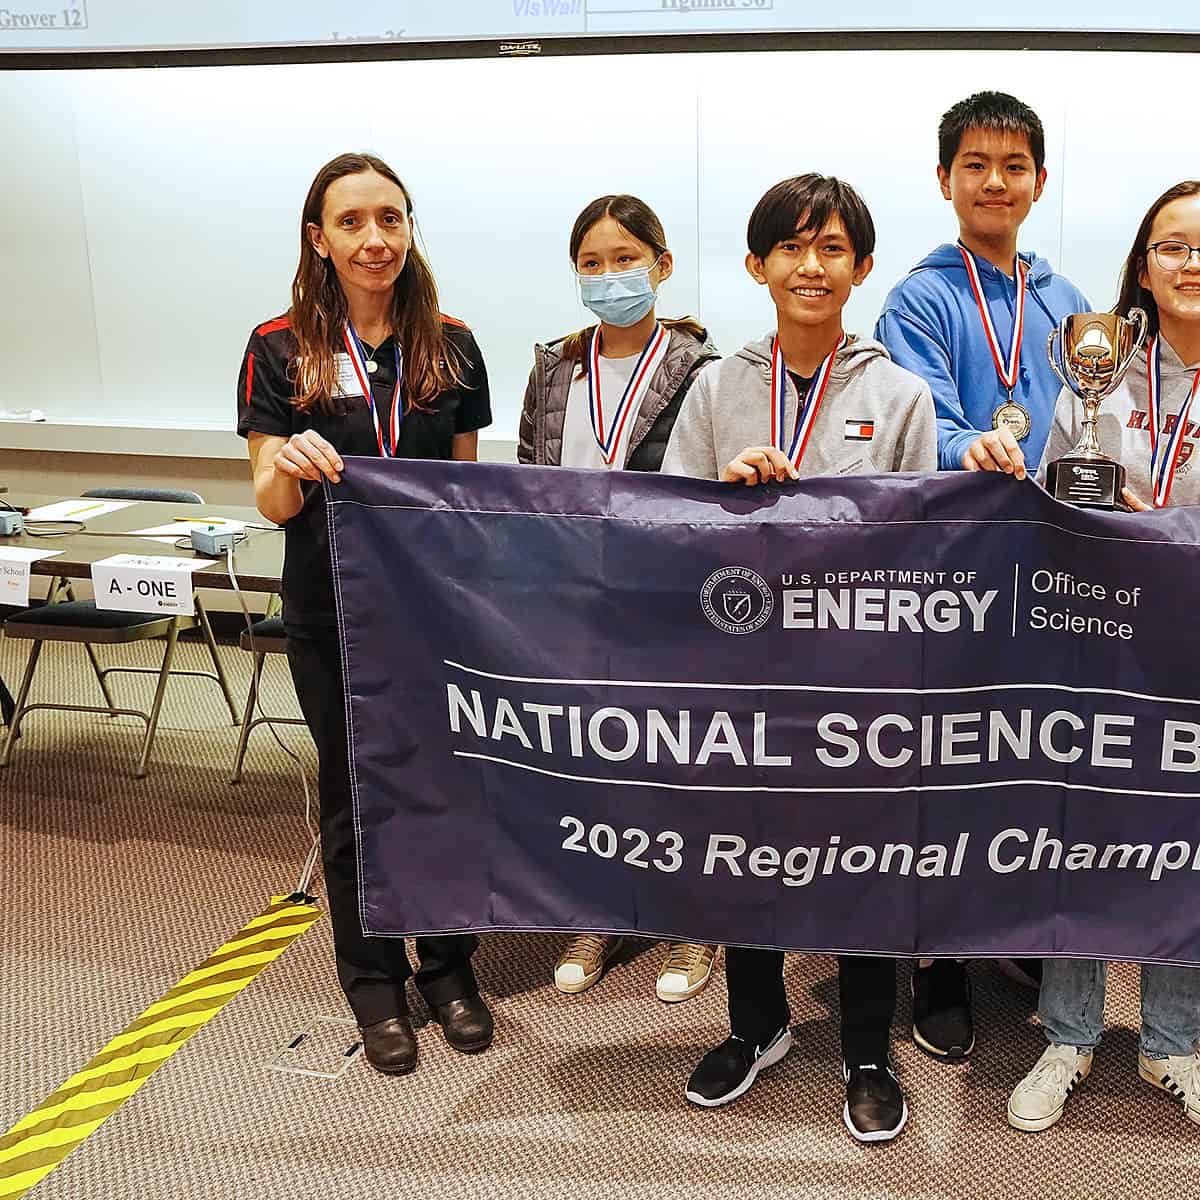 Princeton Charter School, Princeton International School of Mathematics and Science teams headed to National Science Bowl